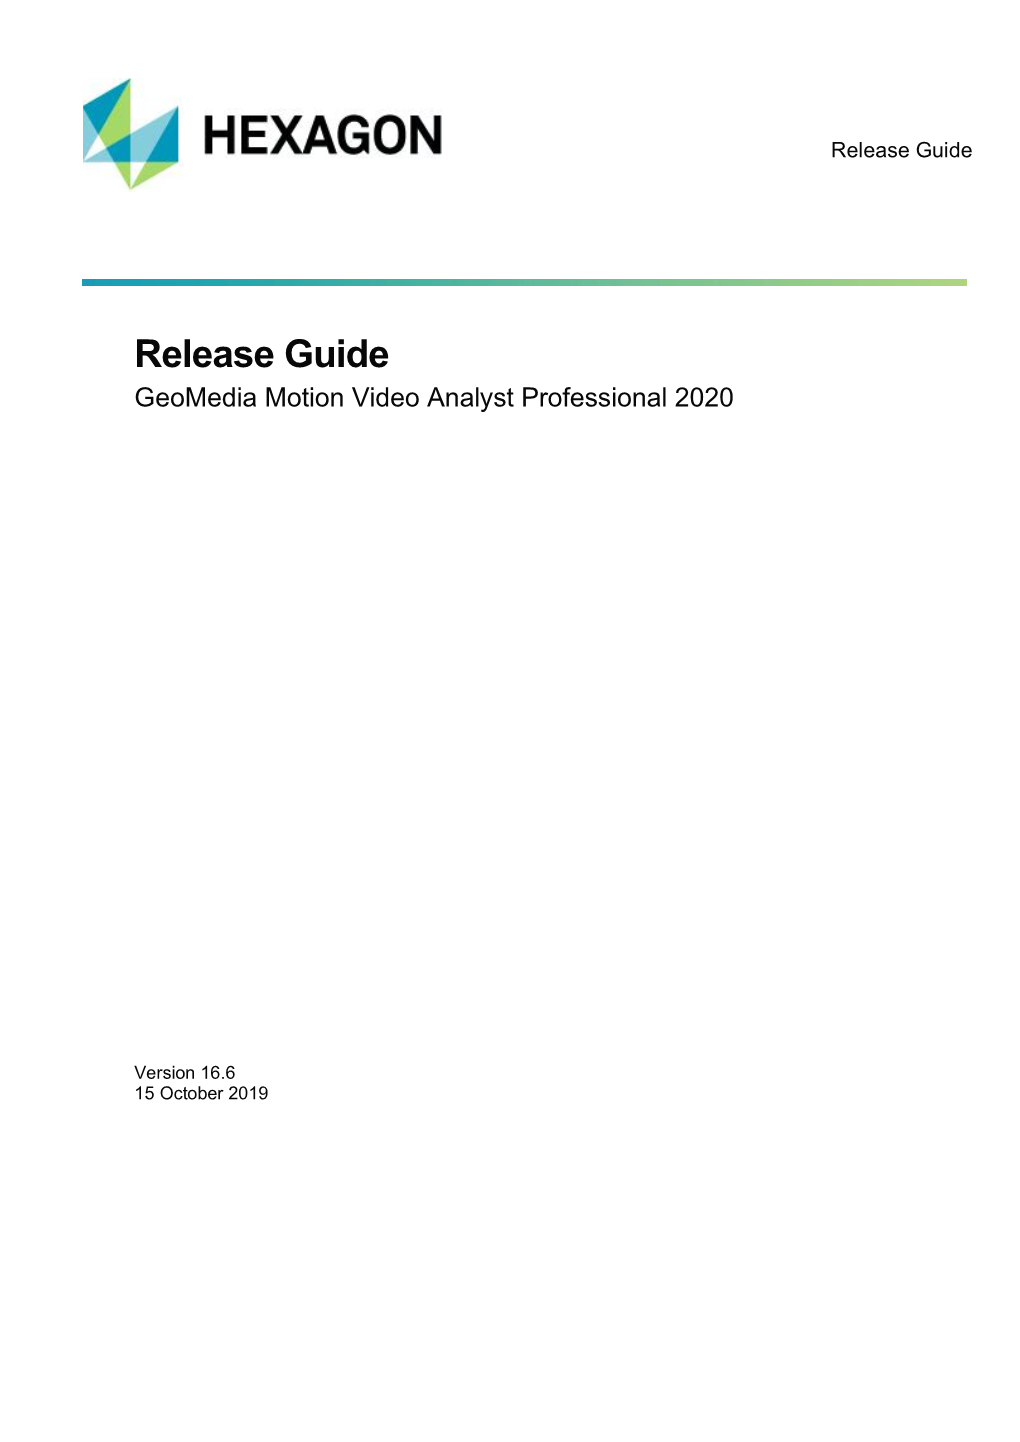 Geomedia Motion Video Analyst Professional 2020 Release Guide